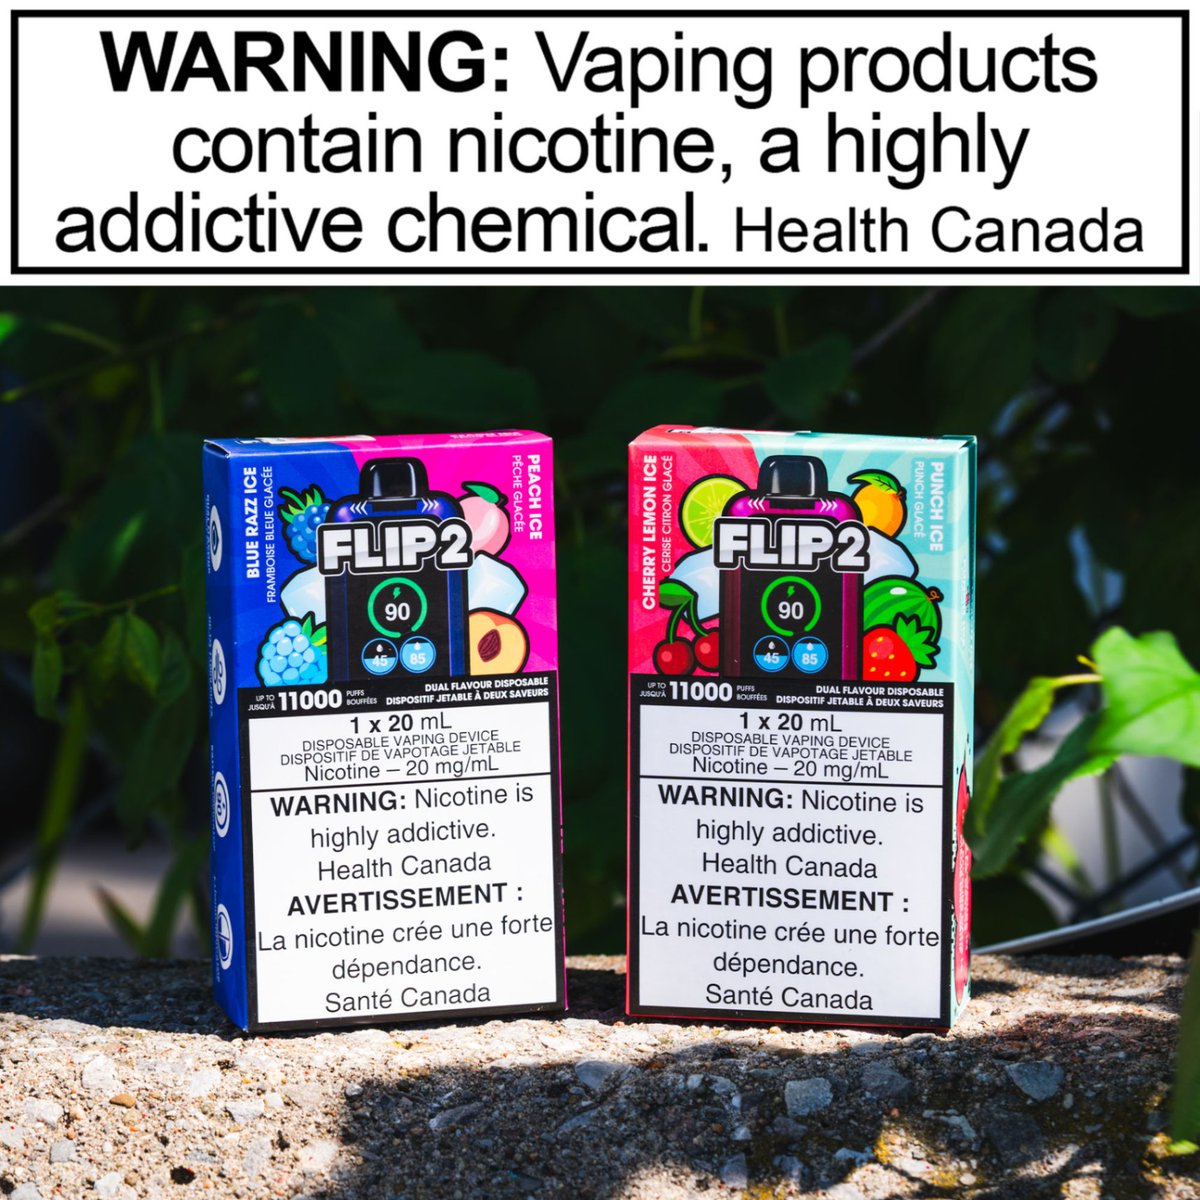 Meet the FLIP 2 Disposable Dual Vape Pen at VapeMeet! Enjoy 11,000 puffs with 20mL capacity, rechargeable 850mAh battery, adjustable airflow, and an LED screen. Grab yours at VapeMeet.ca for top-tier convenience and control. #VapeMeet #FLIP2 #DisposableVape